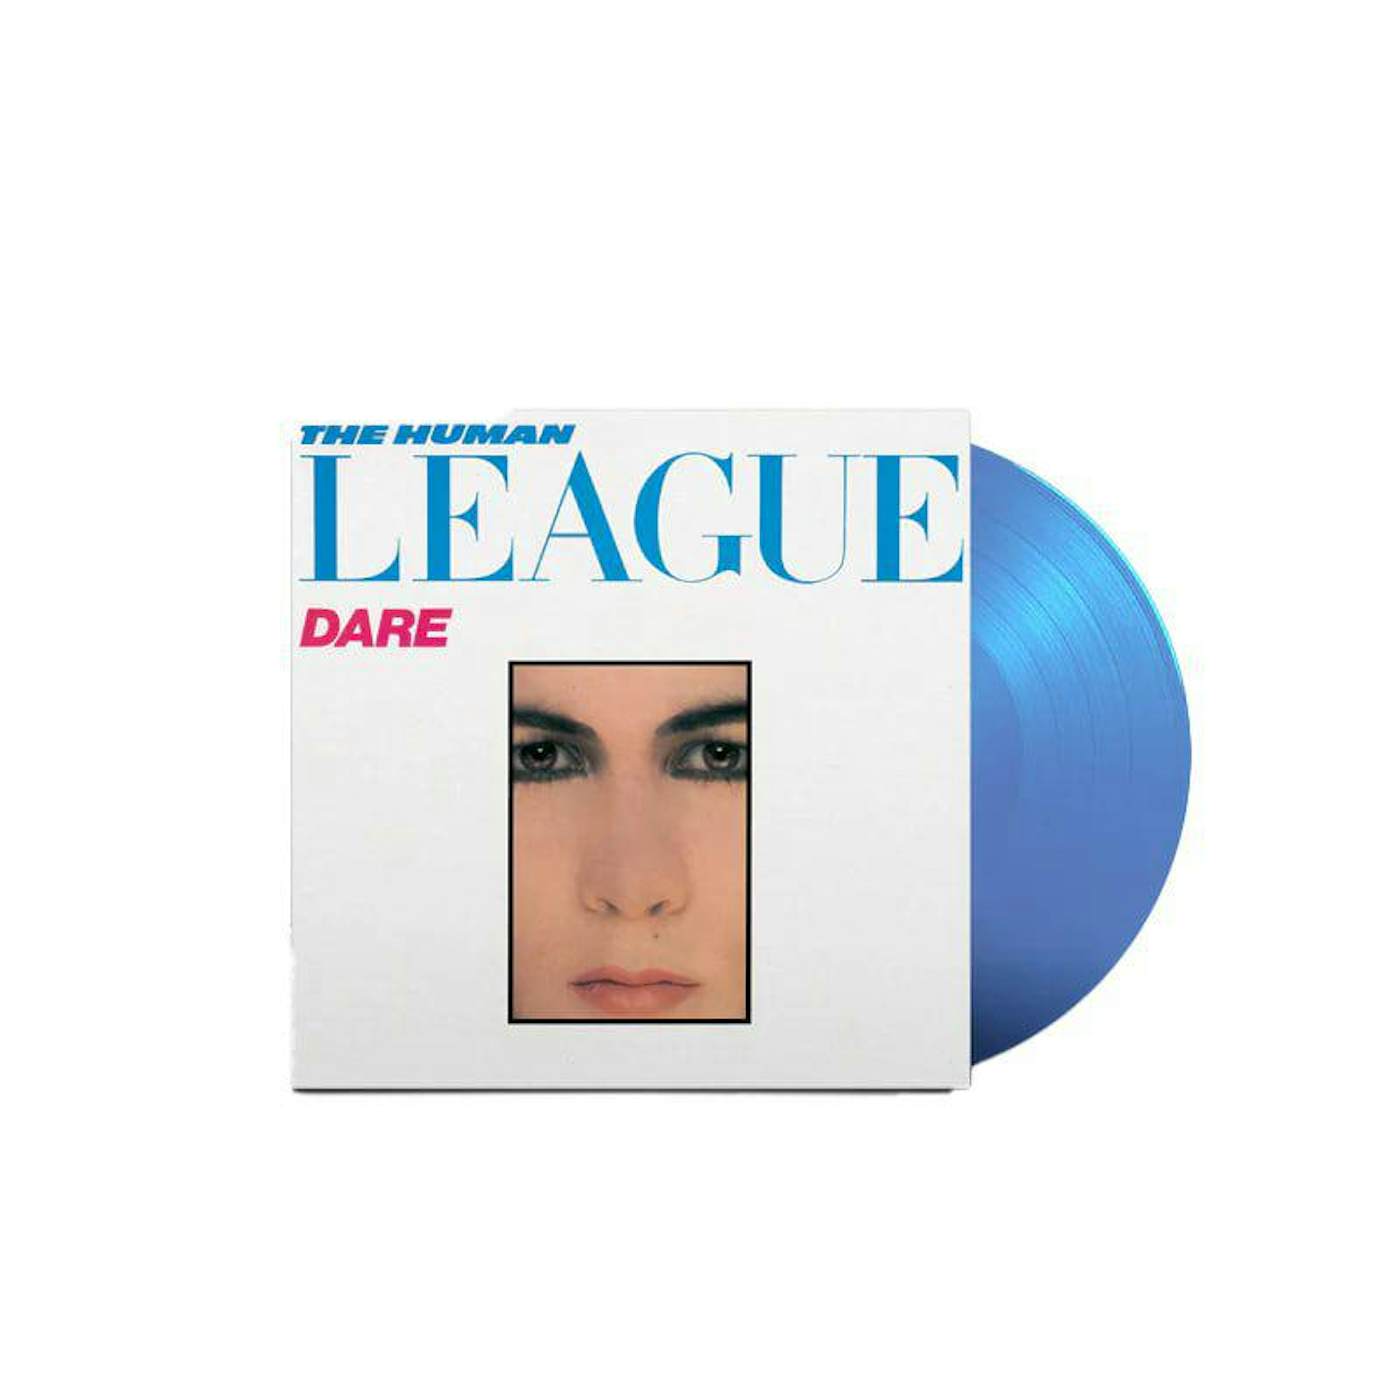 The Human League Dare (Limited Blue) Vinyl Record